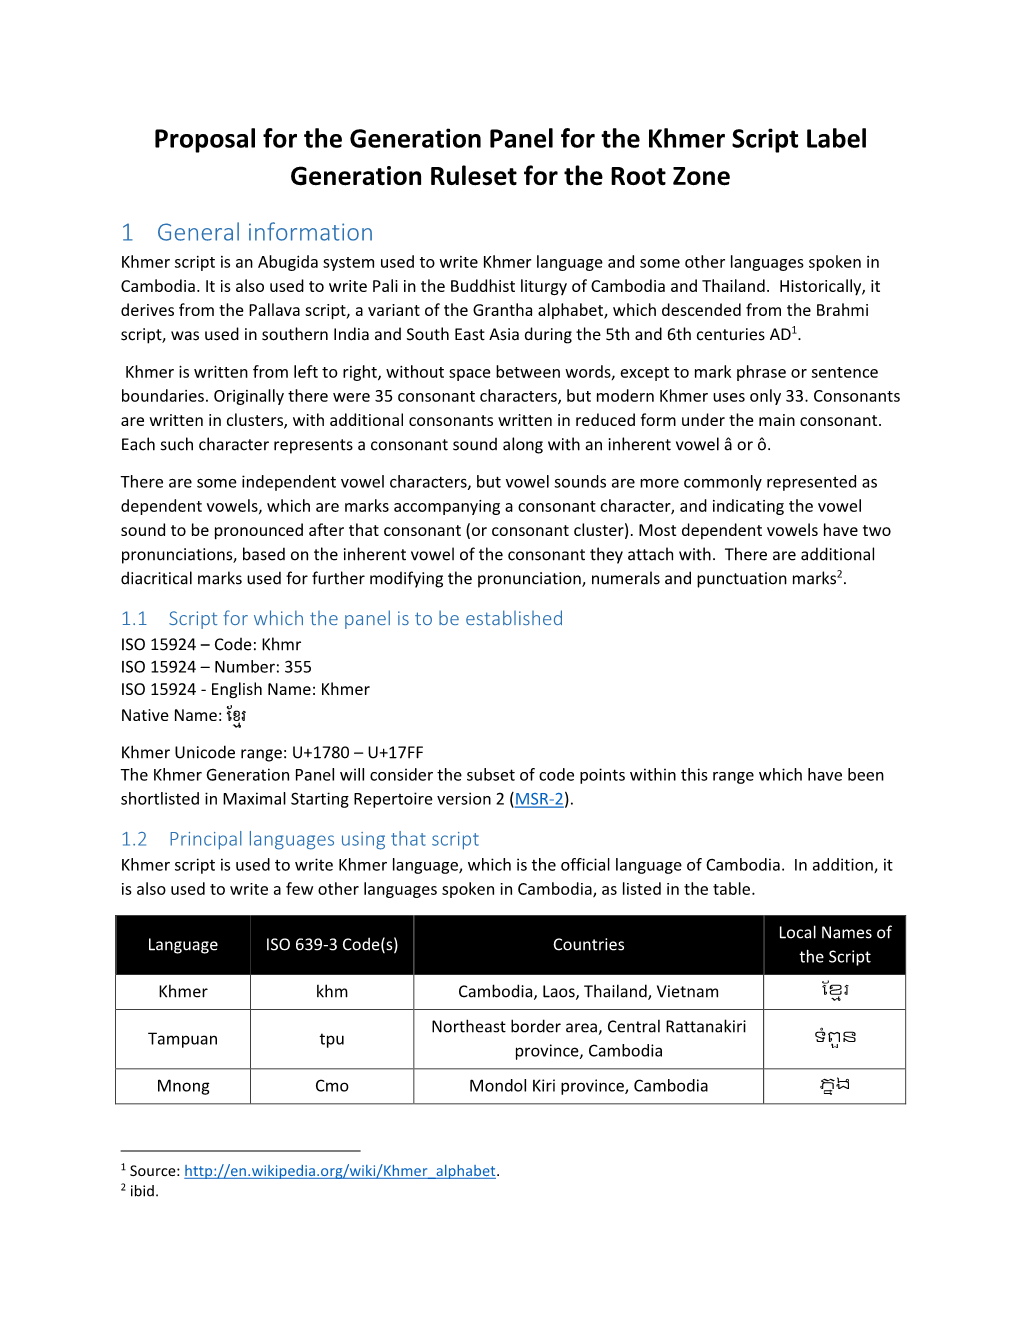 Proposal for the Generation Panel for the Khmer Script Label Generation Ruleset for the Root Zone